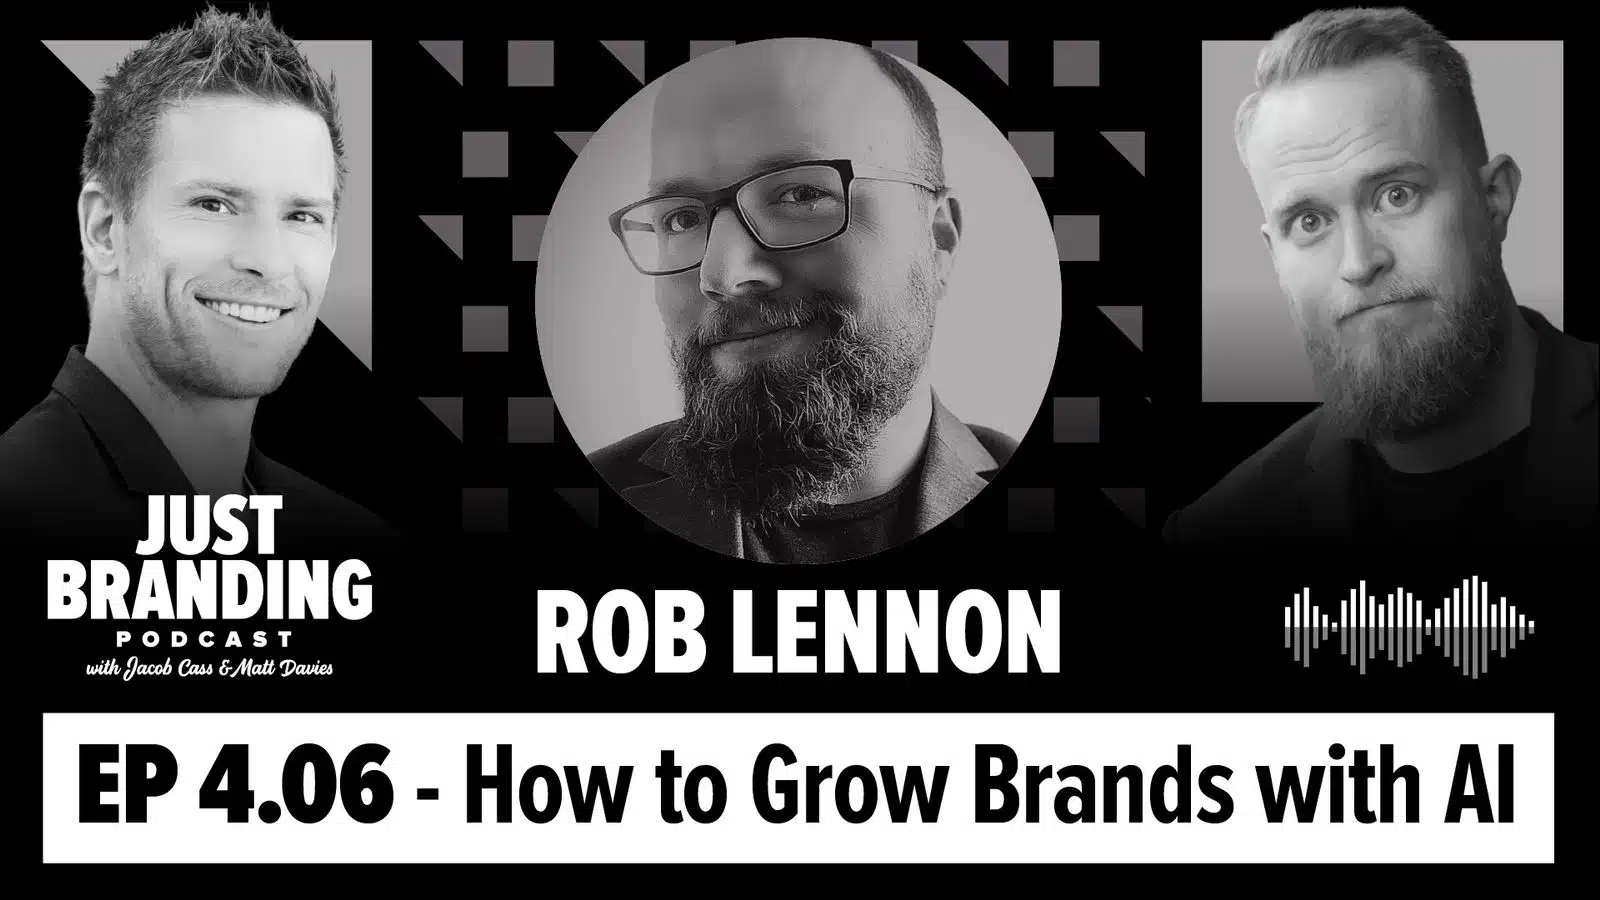 How to Grow Brands with AI with Rob Lennon